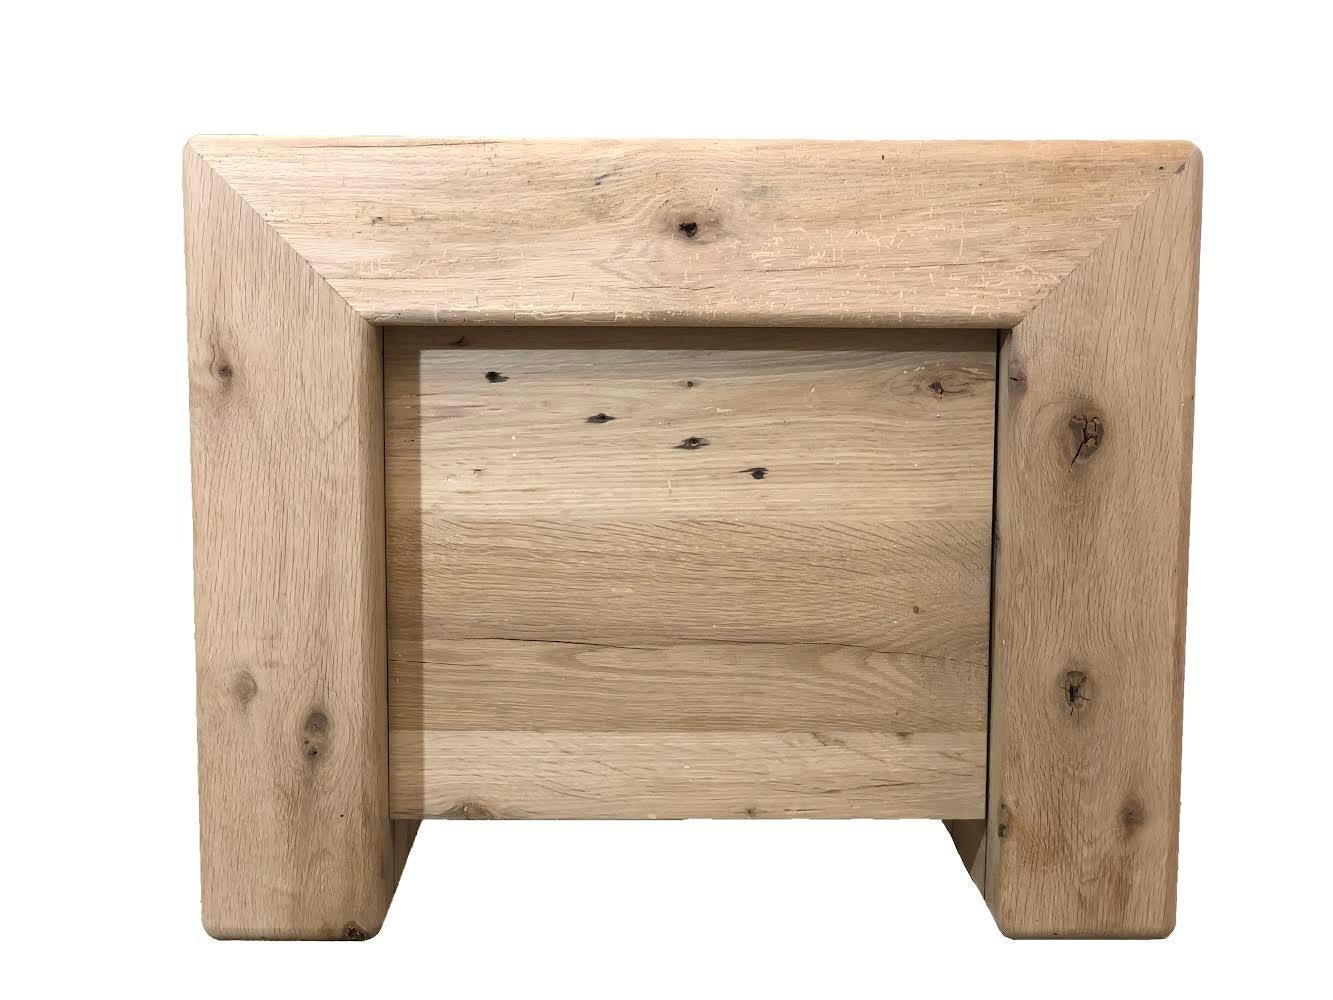 American Modern Solid White Oak Handmade Side Table With/Drawer by Fortunata Design For Sale